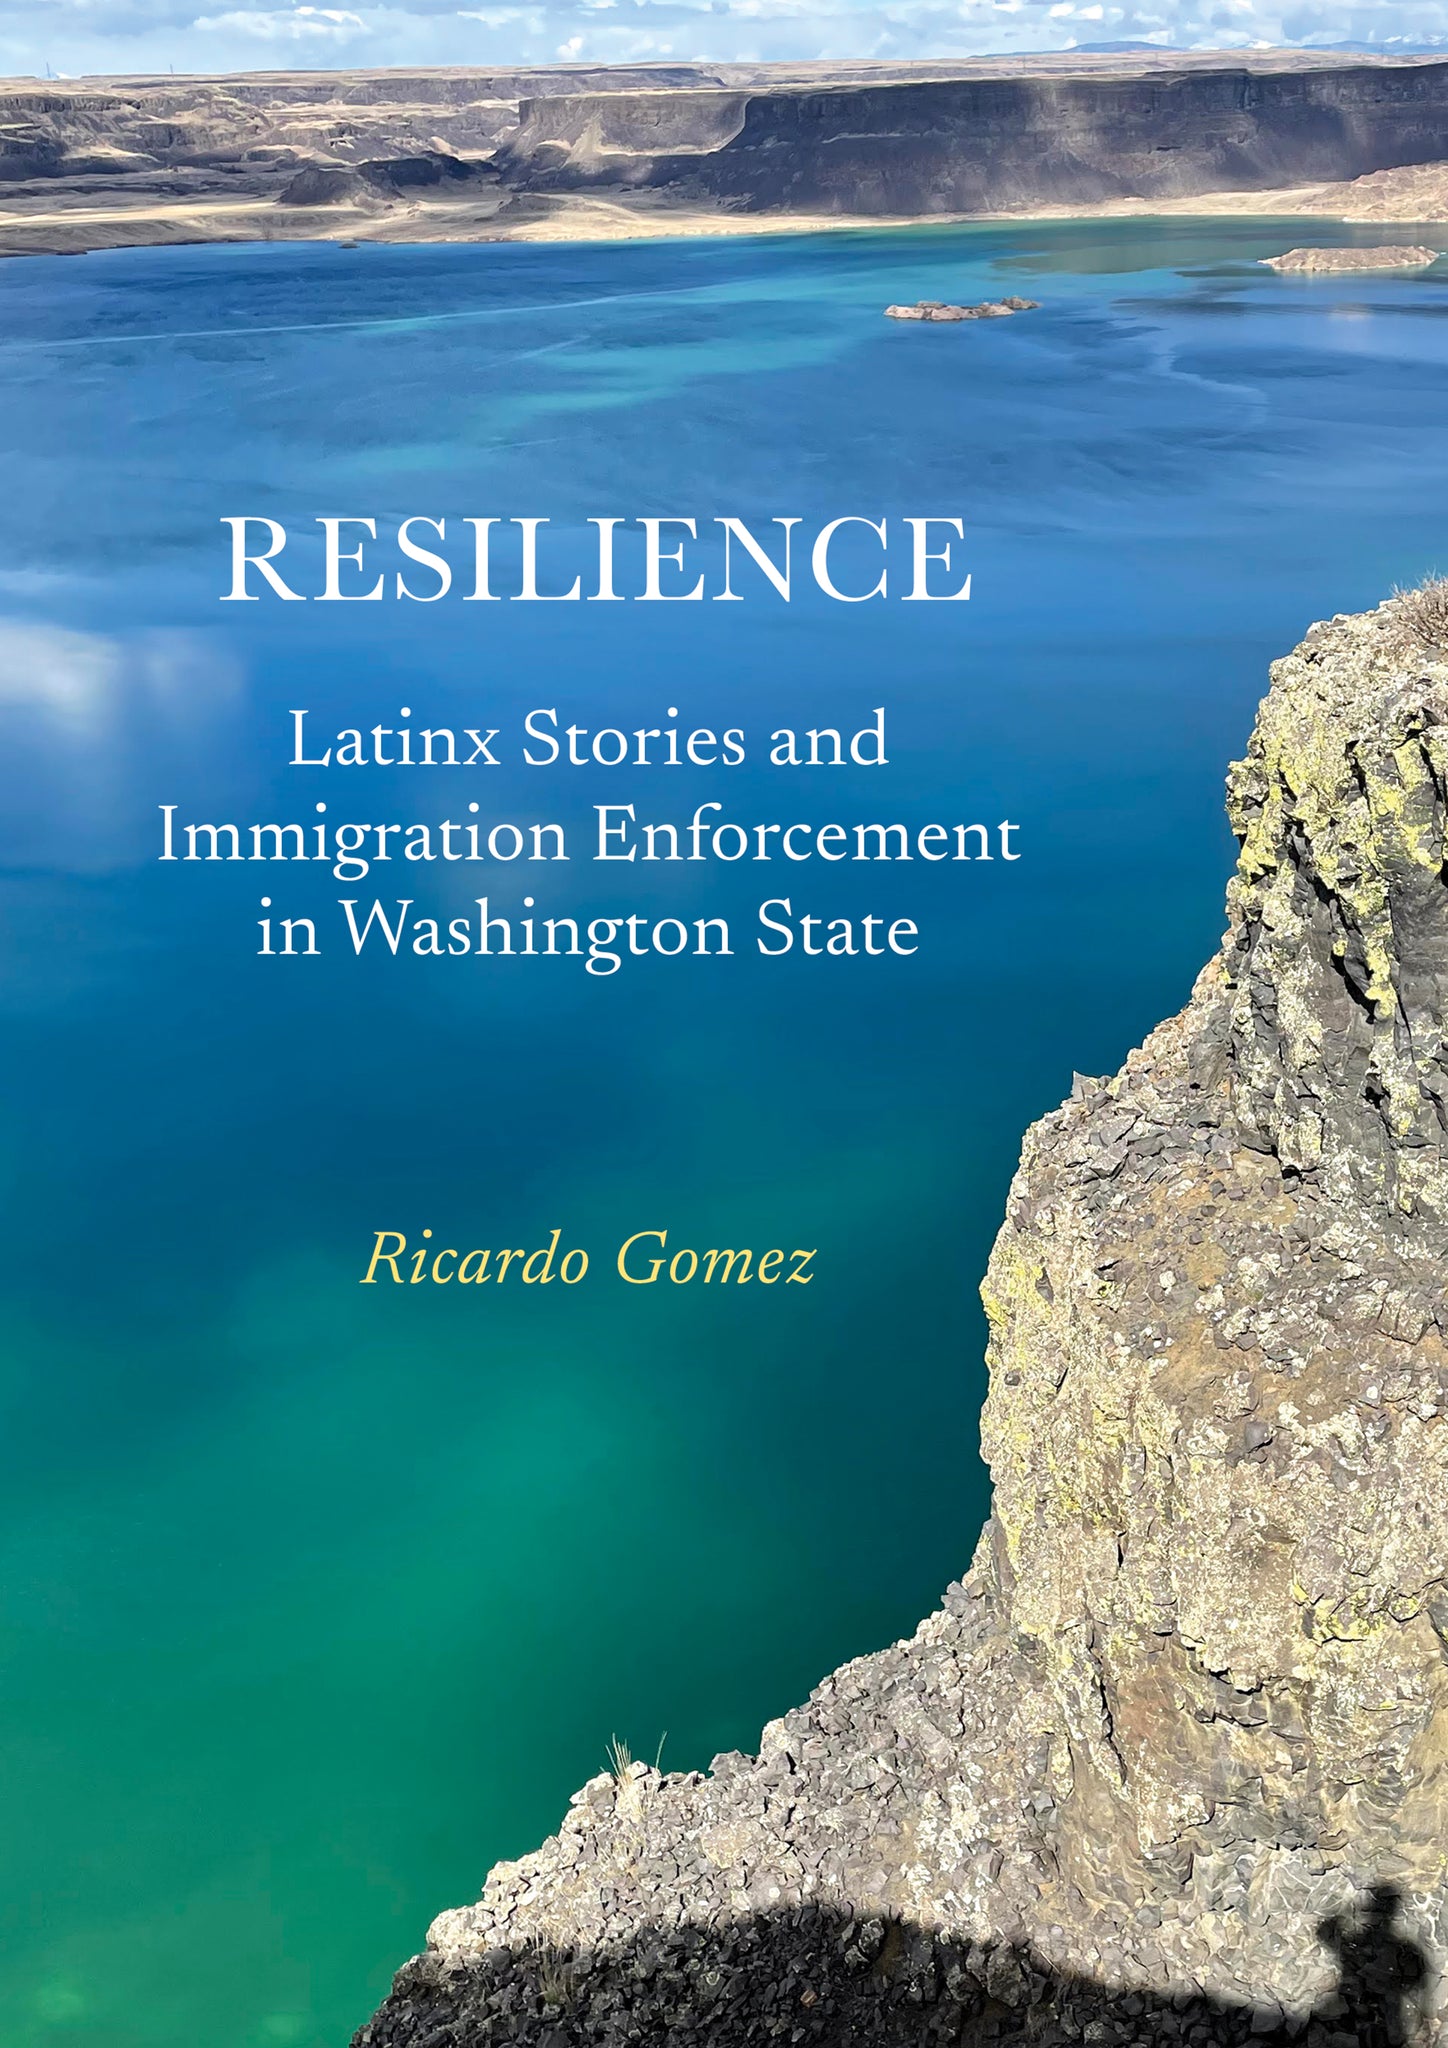 Resilience: Latinx Stories and Immigration Enforcement in Washington State